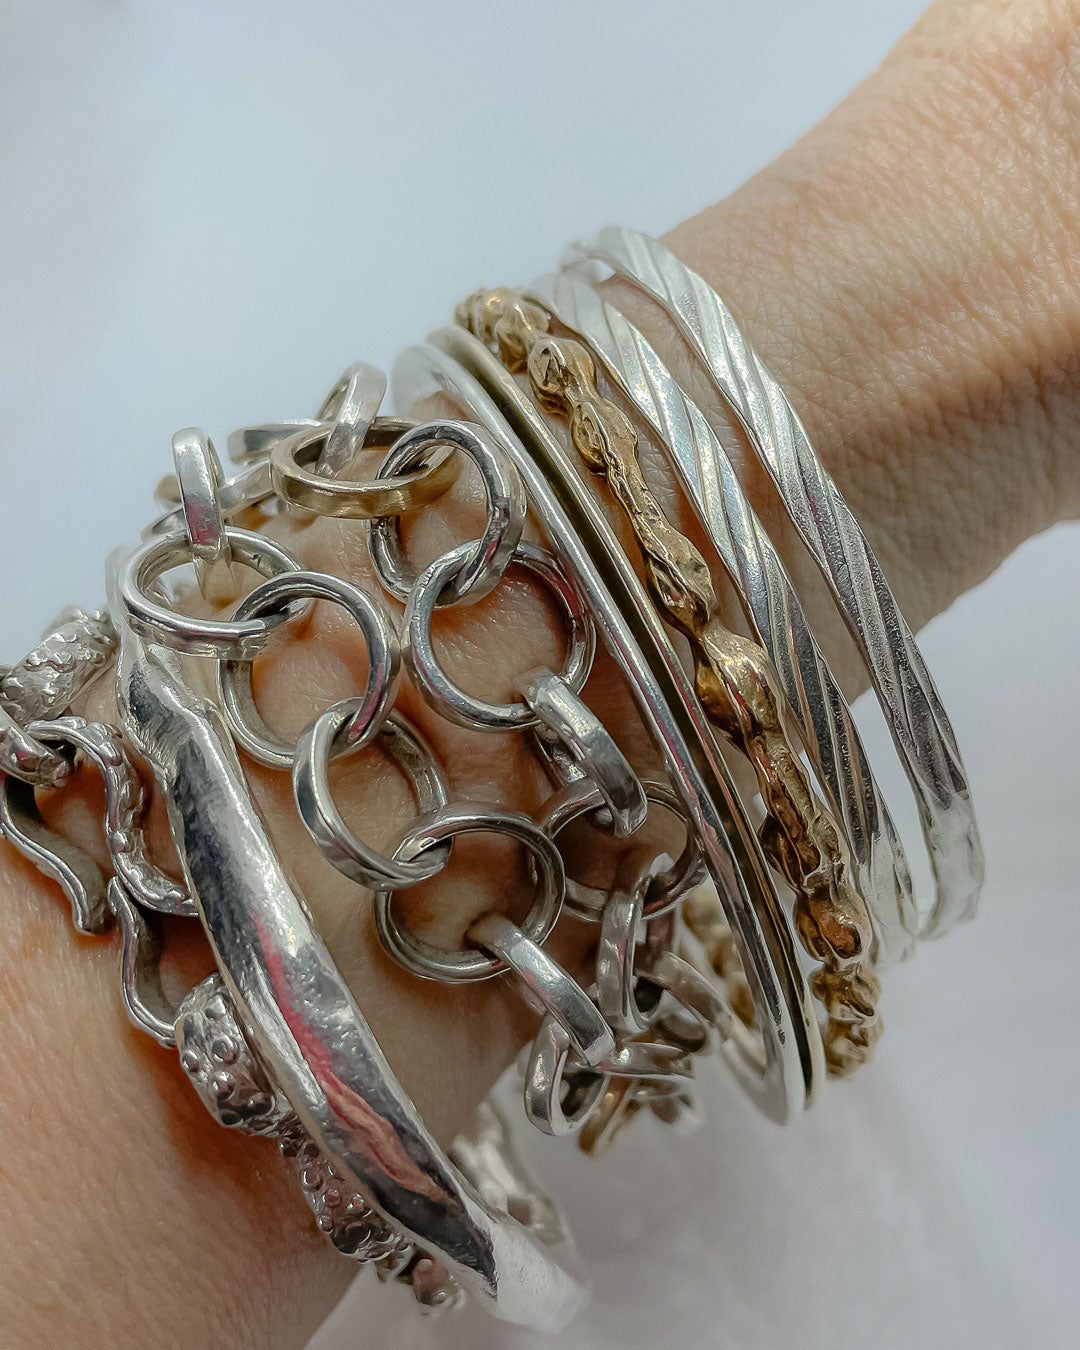 Two sterling Silver stacking bangles alongside a mix of chains and bangles on a womans wrist